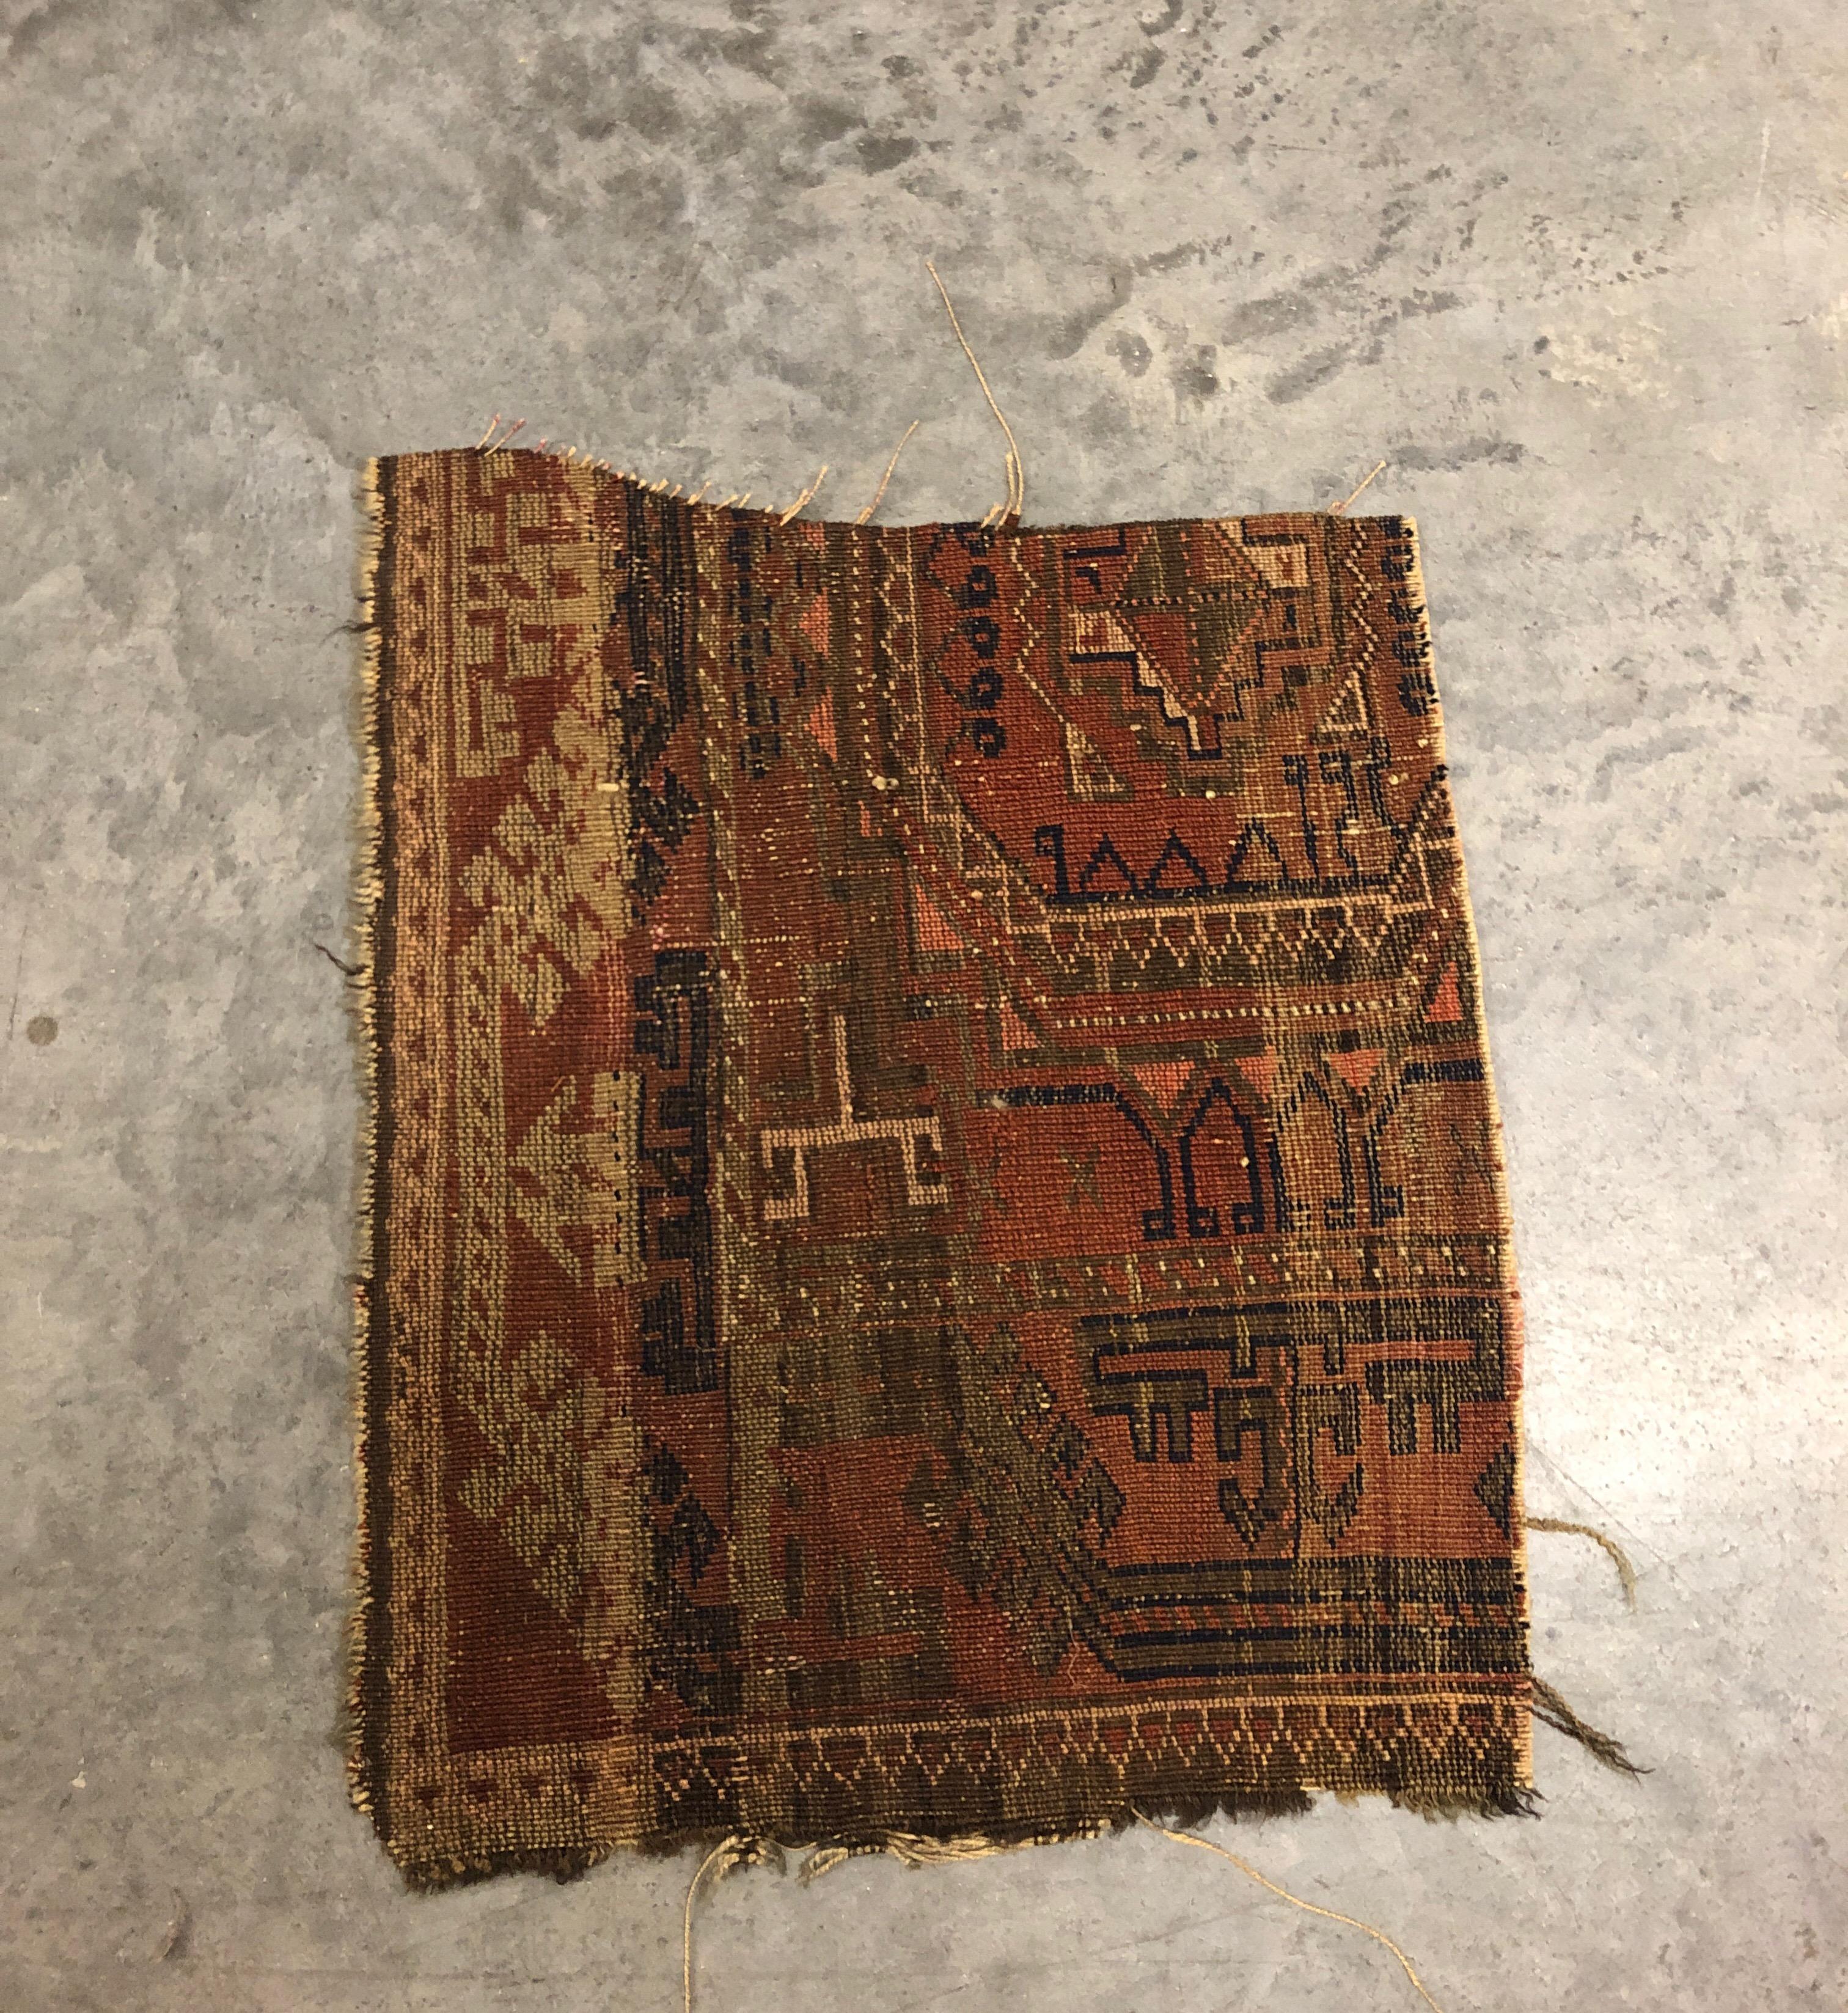 Antique orange and blue Persian rug fragment.
Ideal for a pillow or to upholster a small footstool.
Size: 18